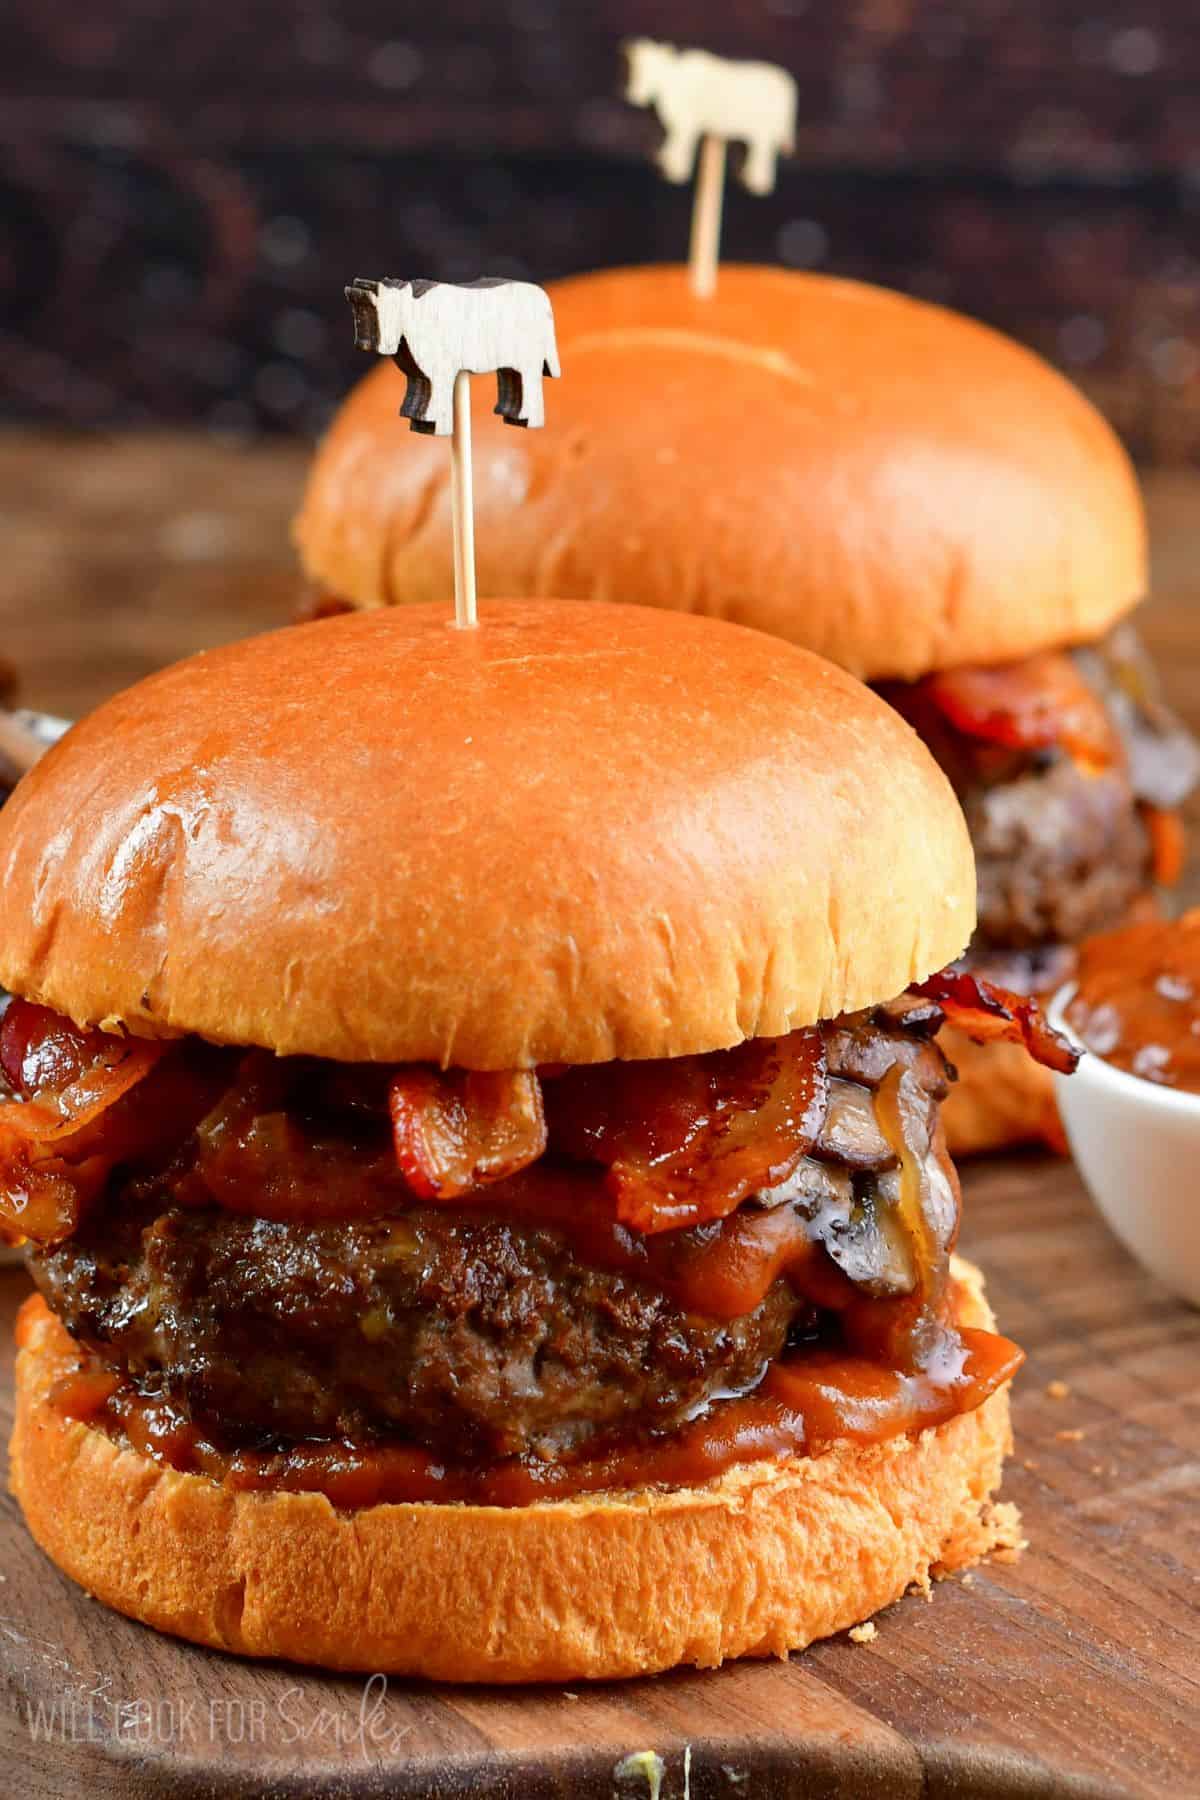 Two burgers with sauteed mushrooms, bacon, and whiskey sauce on a bun.